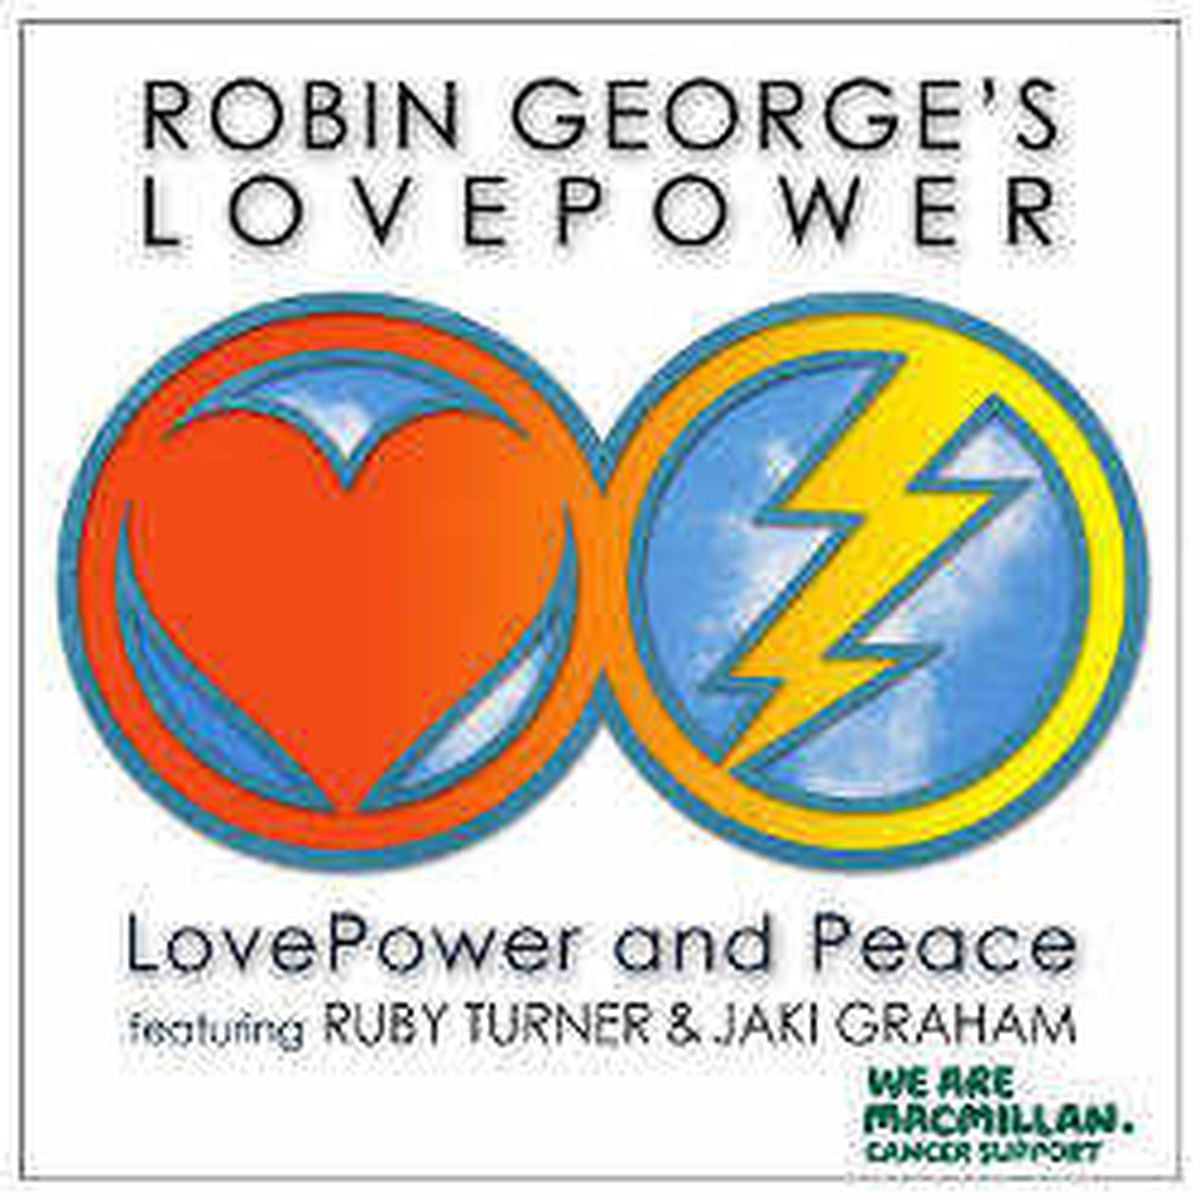 Soul legends on LovePower and Peace charity single